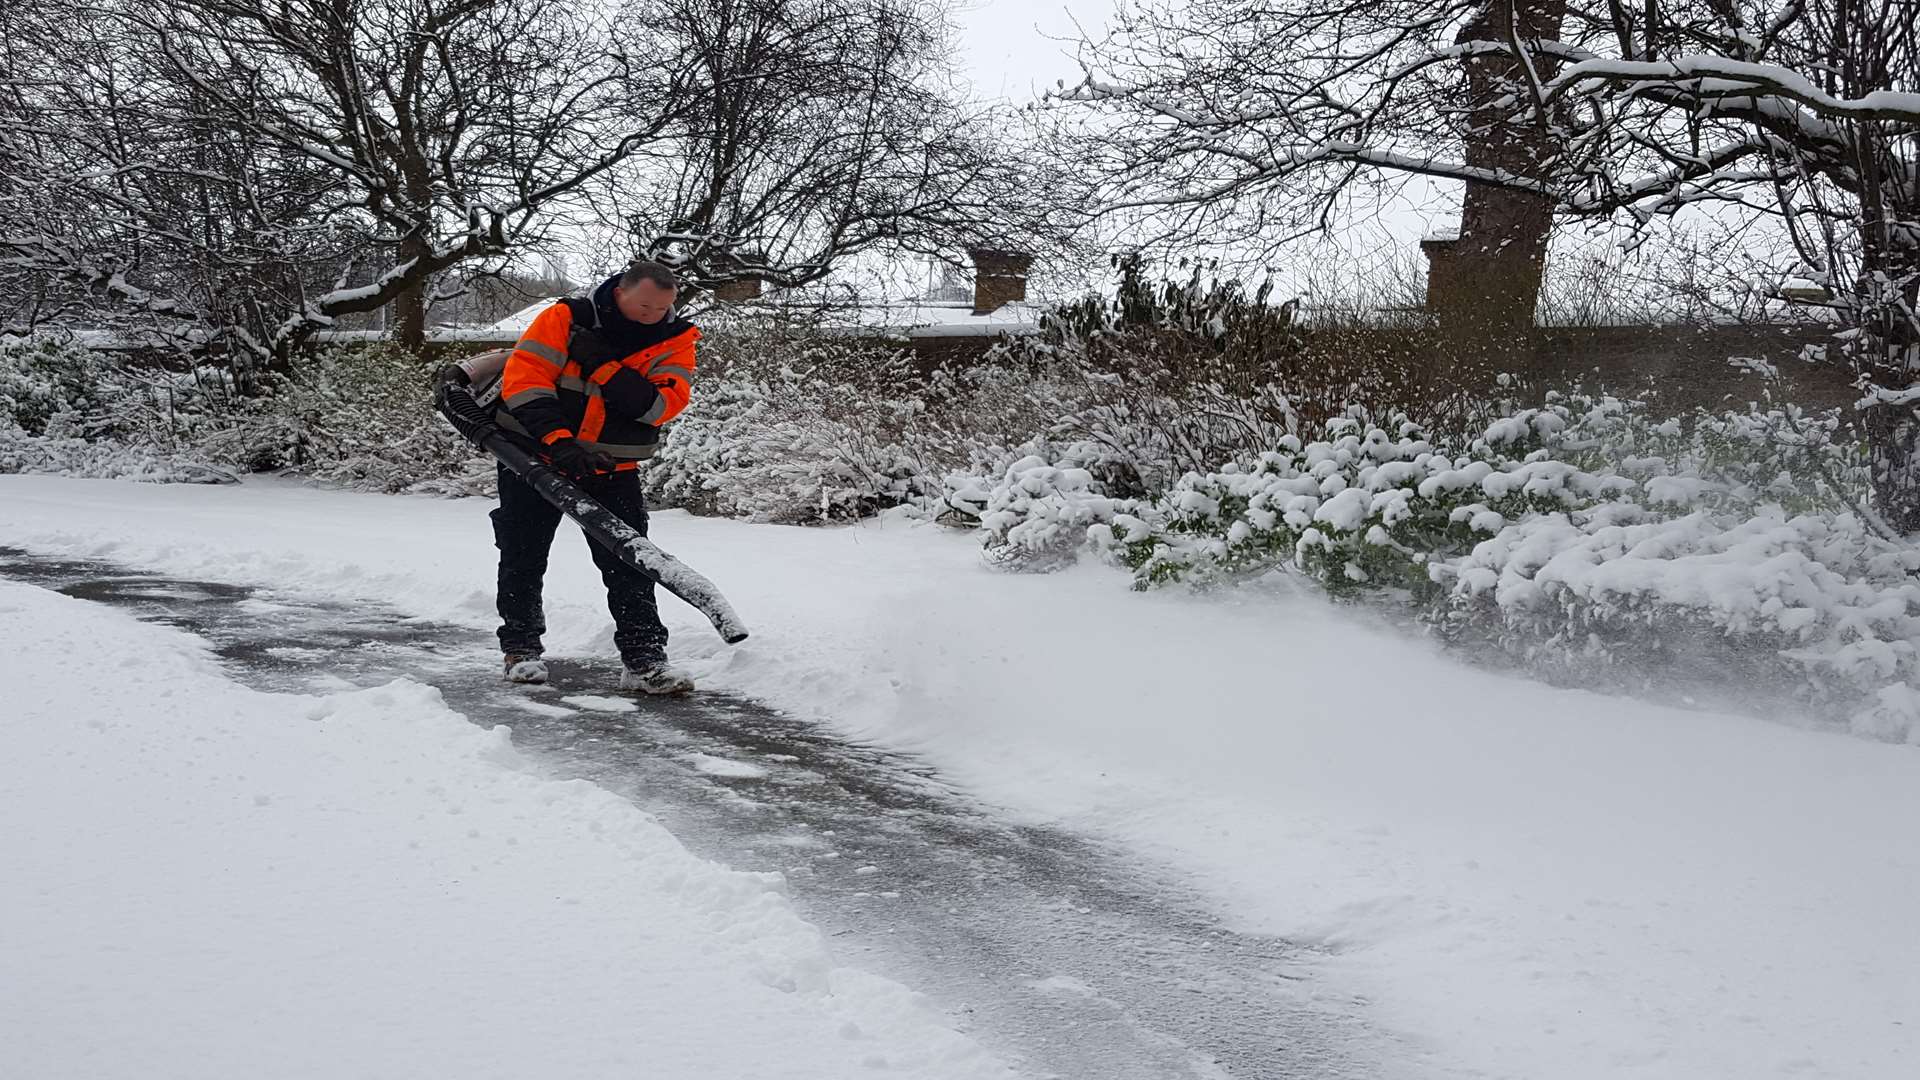 Council workers busily clearing the snow in Brenchley Gardens